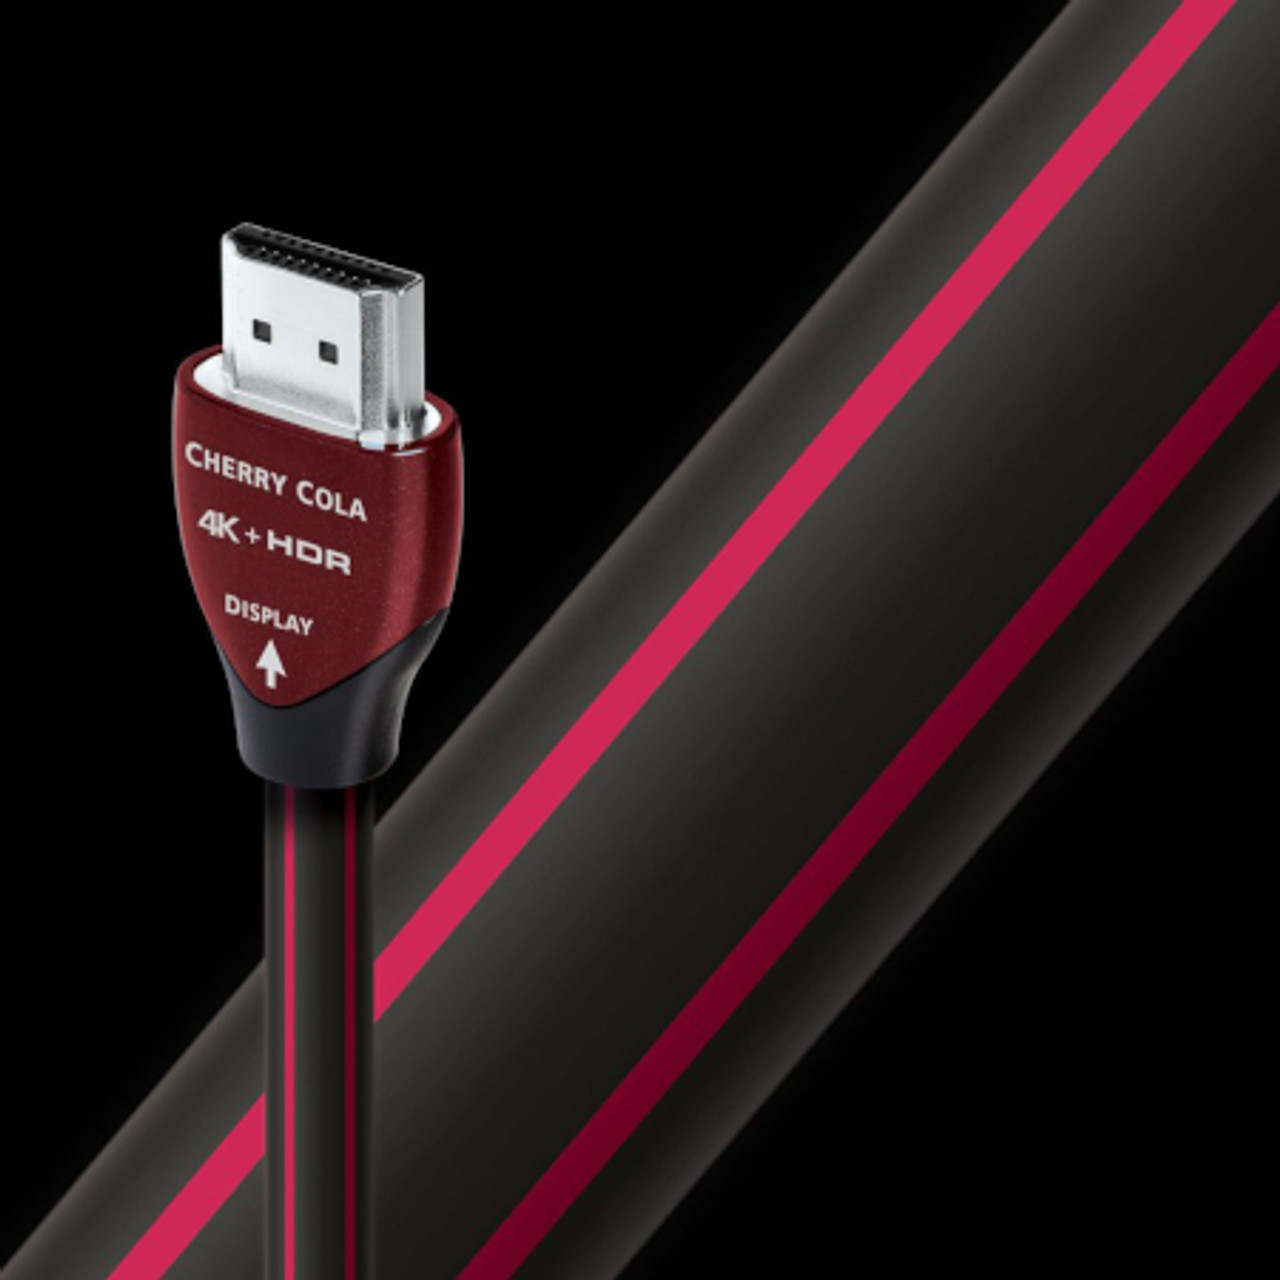 AUDIOQUEST HDMCCOLA05 Cherry Cola 5m Active Optical Cable - Black/Red